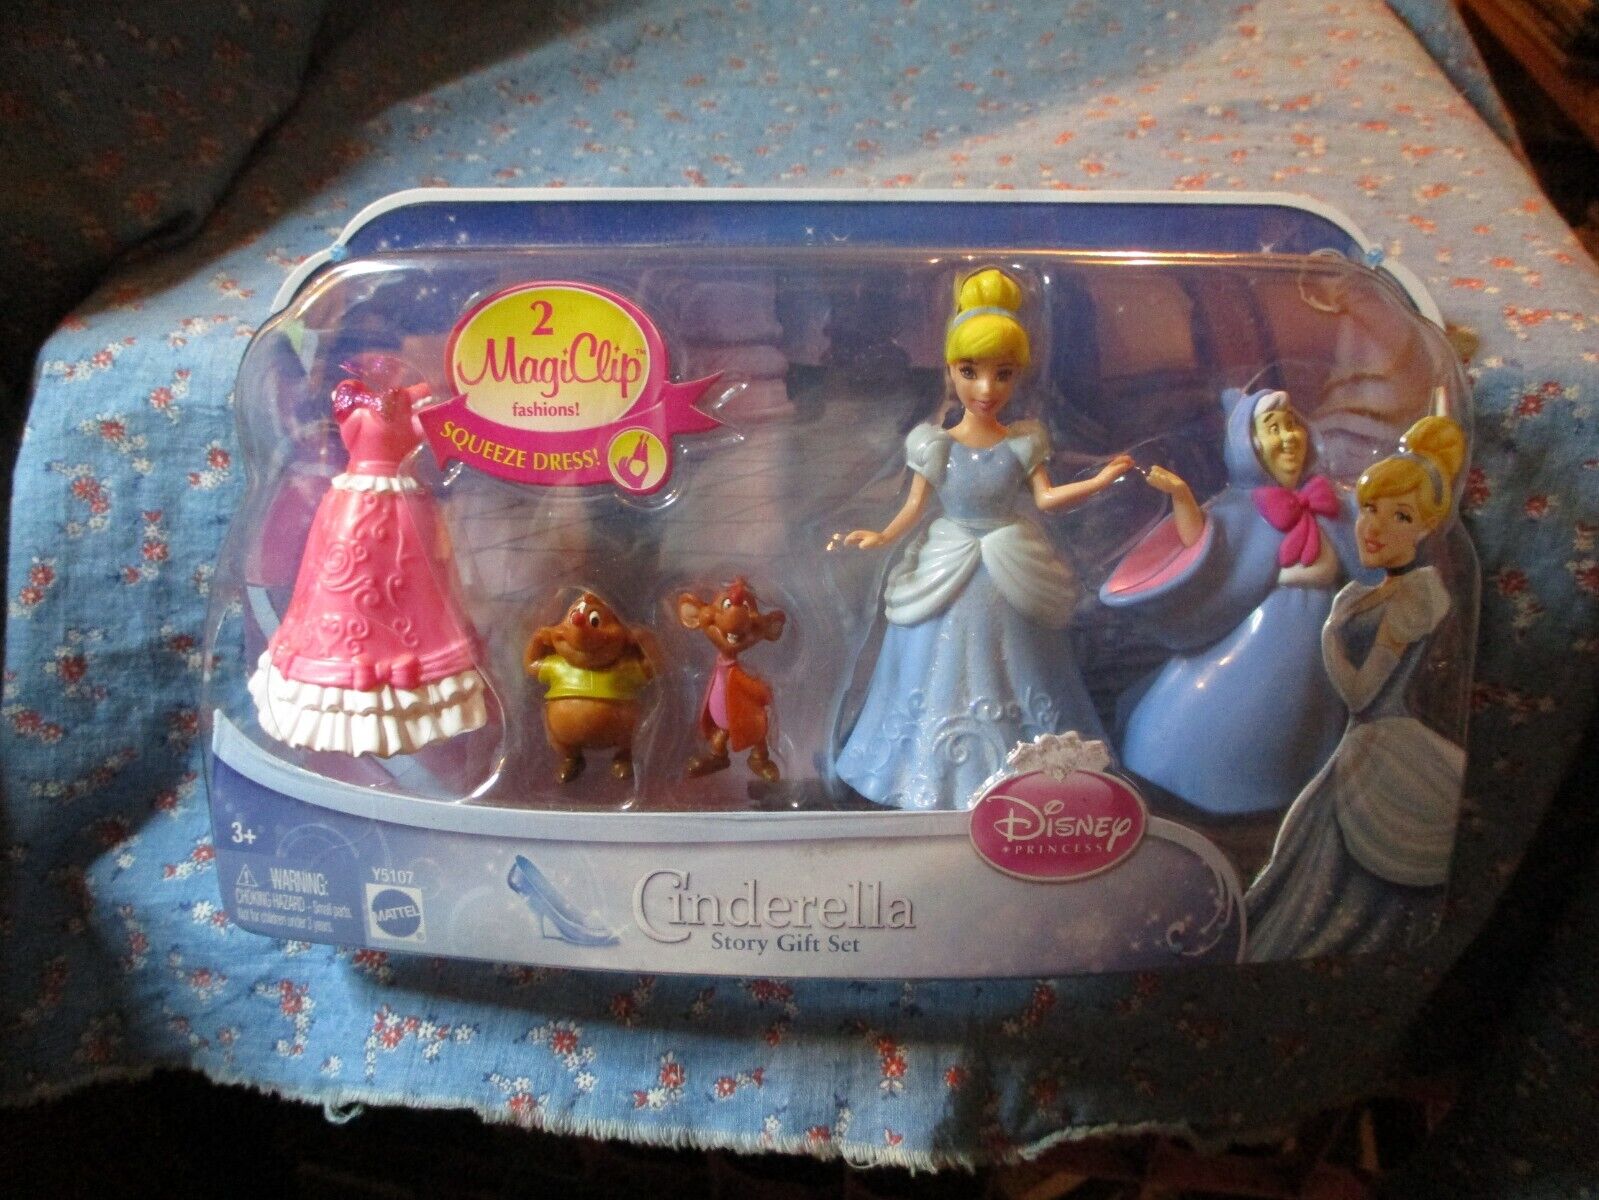 NOS Disney Cinderella Story Gift Set 2 MagiClip Fashions Squeeze Dress Y5107